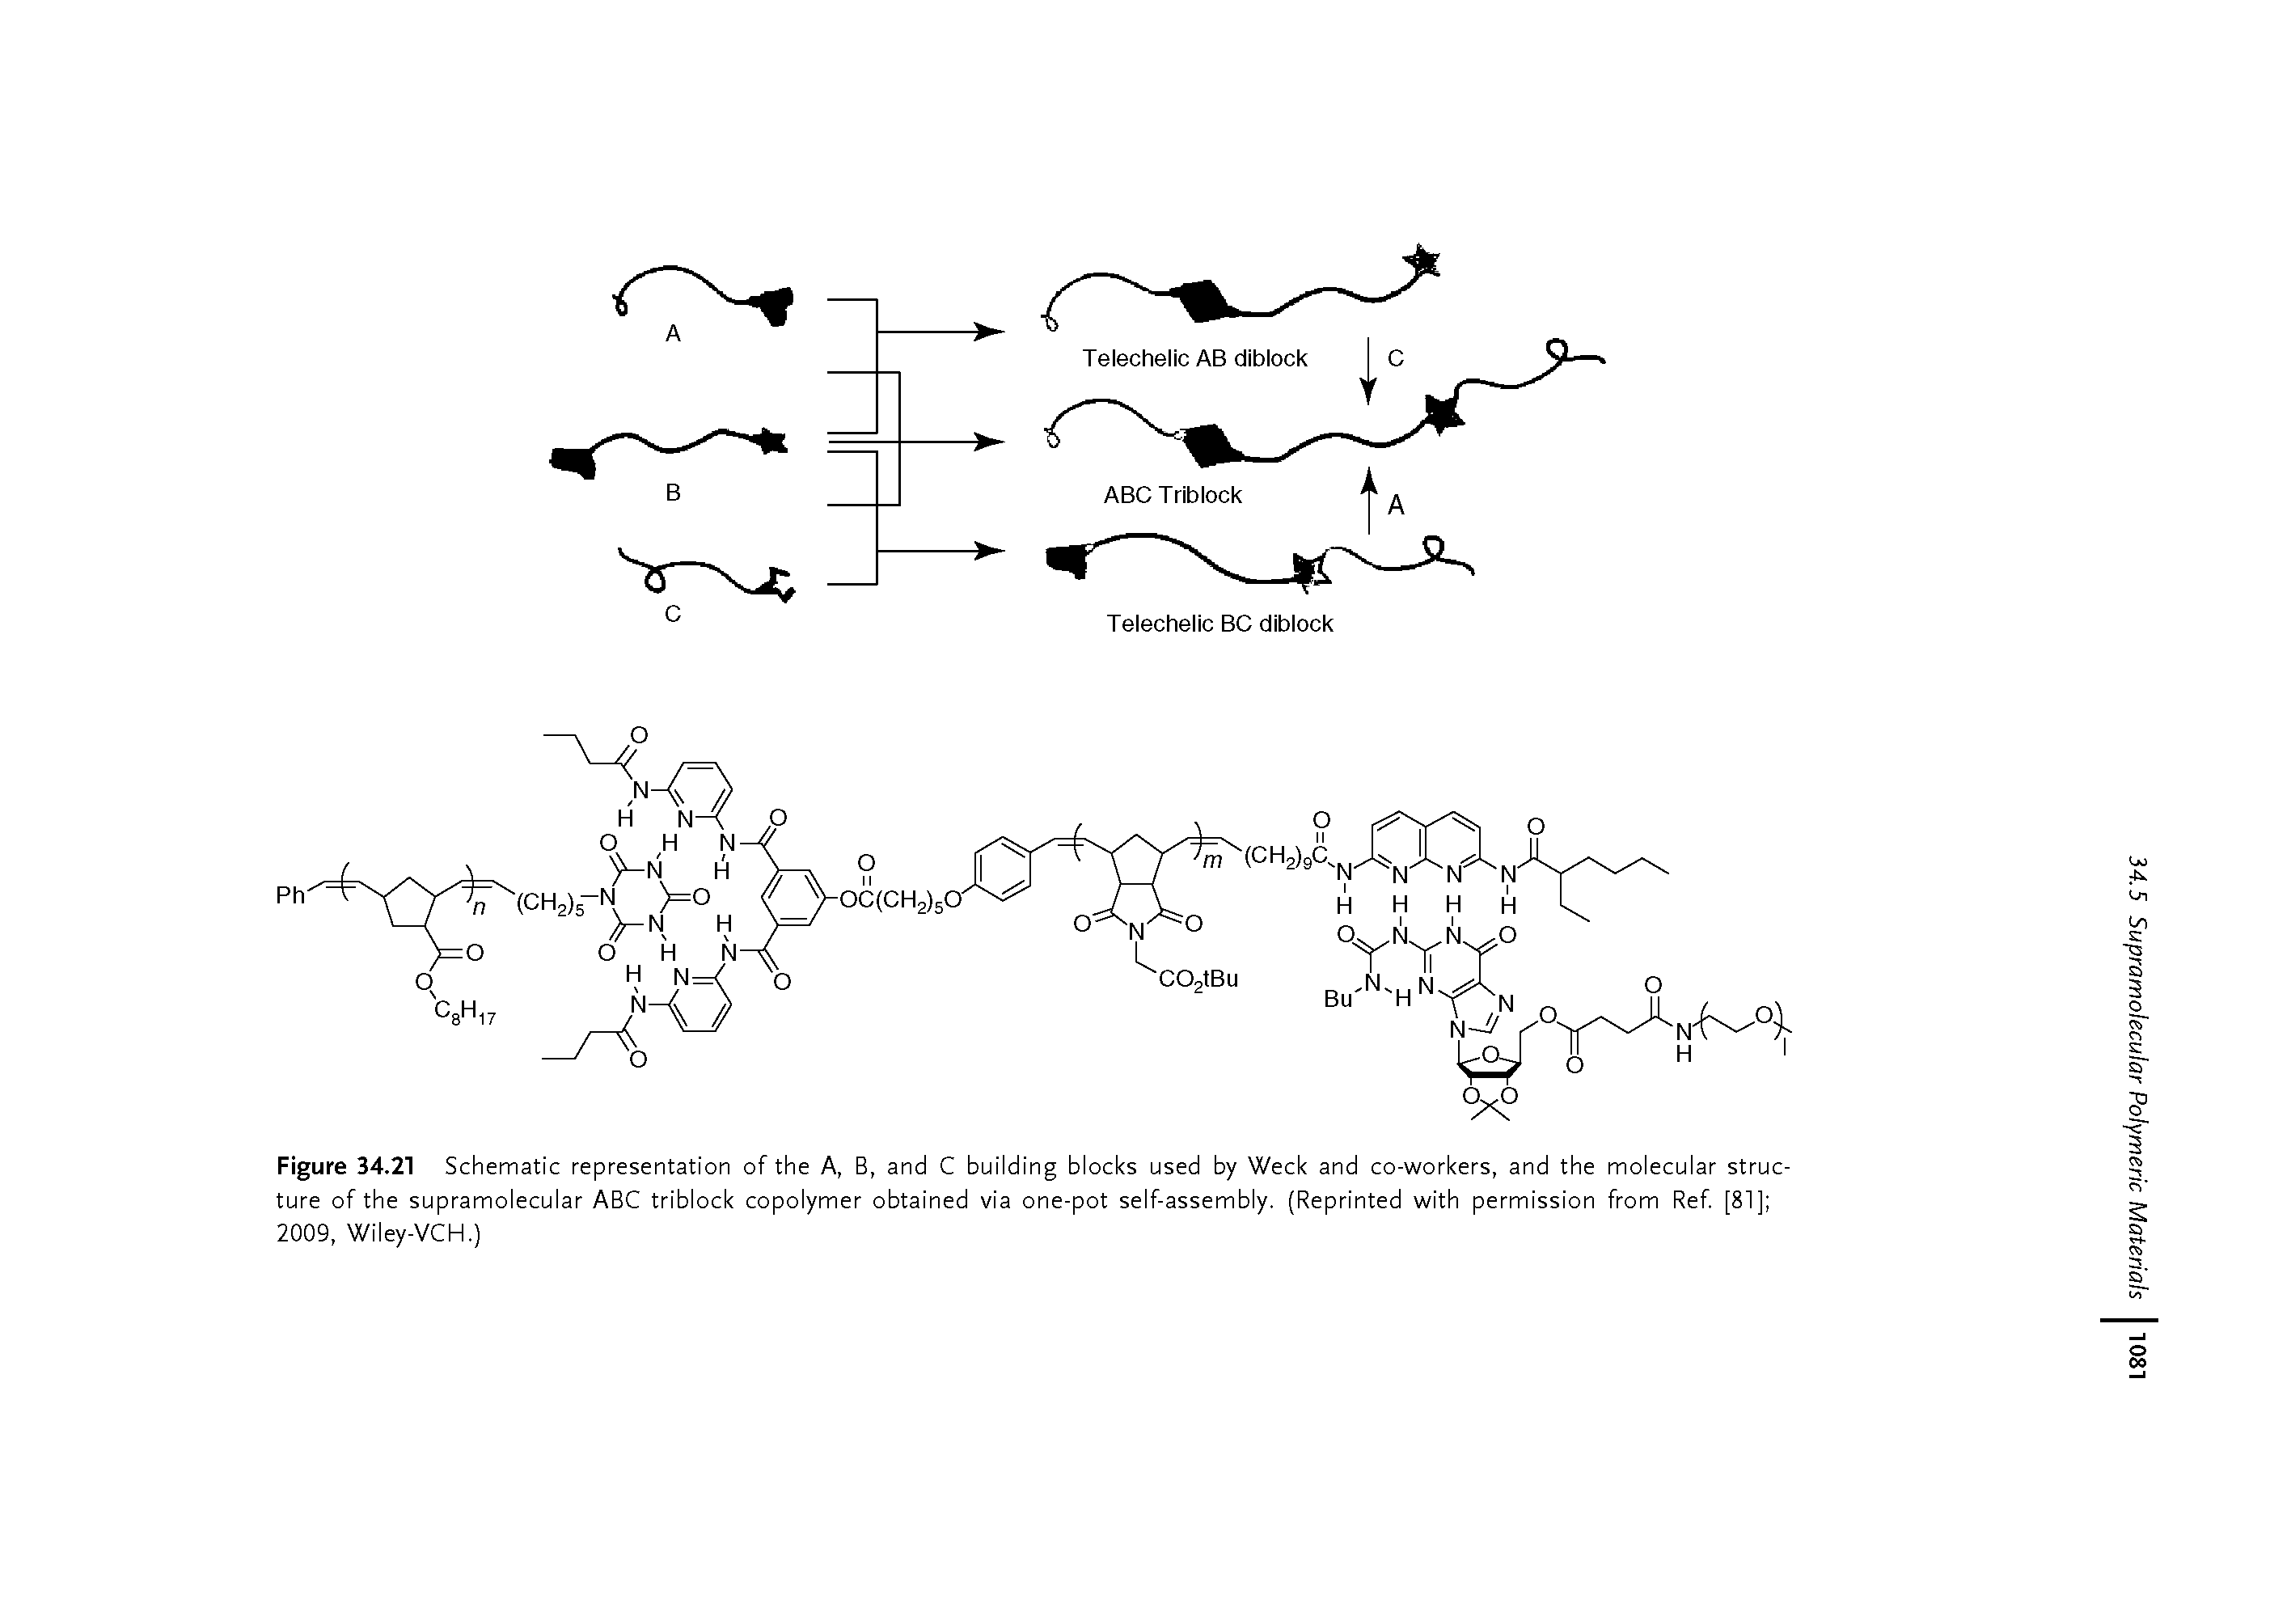 Figure 34.21 Schematic representation of the A, B, and C building blocks used by Week and co-workers, and the molecular structure of the supramolecular ABC triblock copolymer obtained via one-pot self-assembly. (Reprinted with permission from Ref [81] 2009, Wiley-VCH.)...